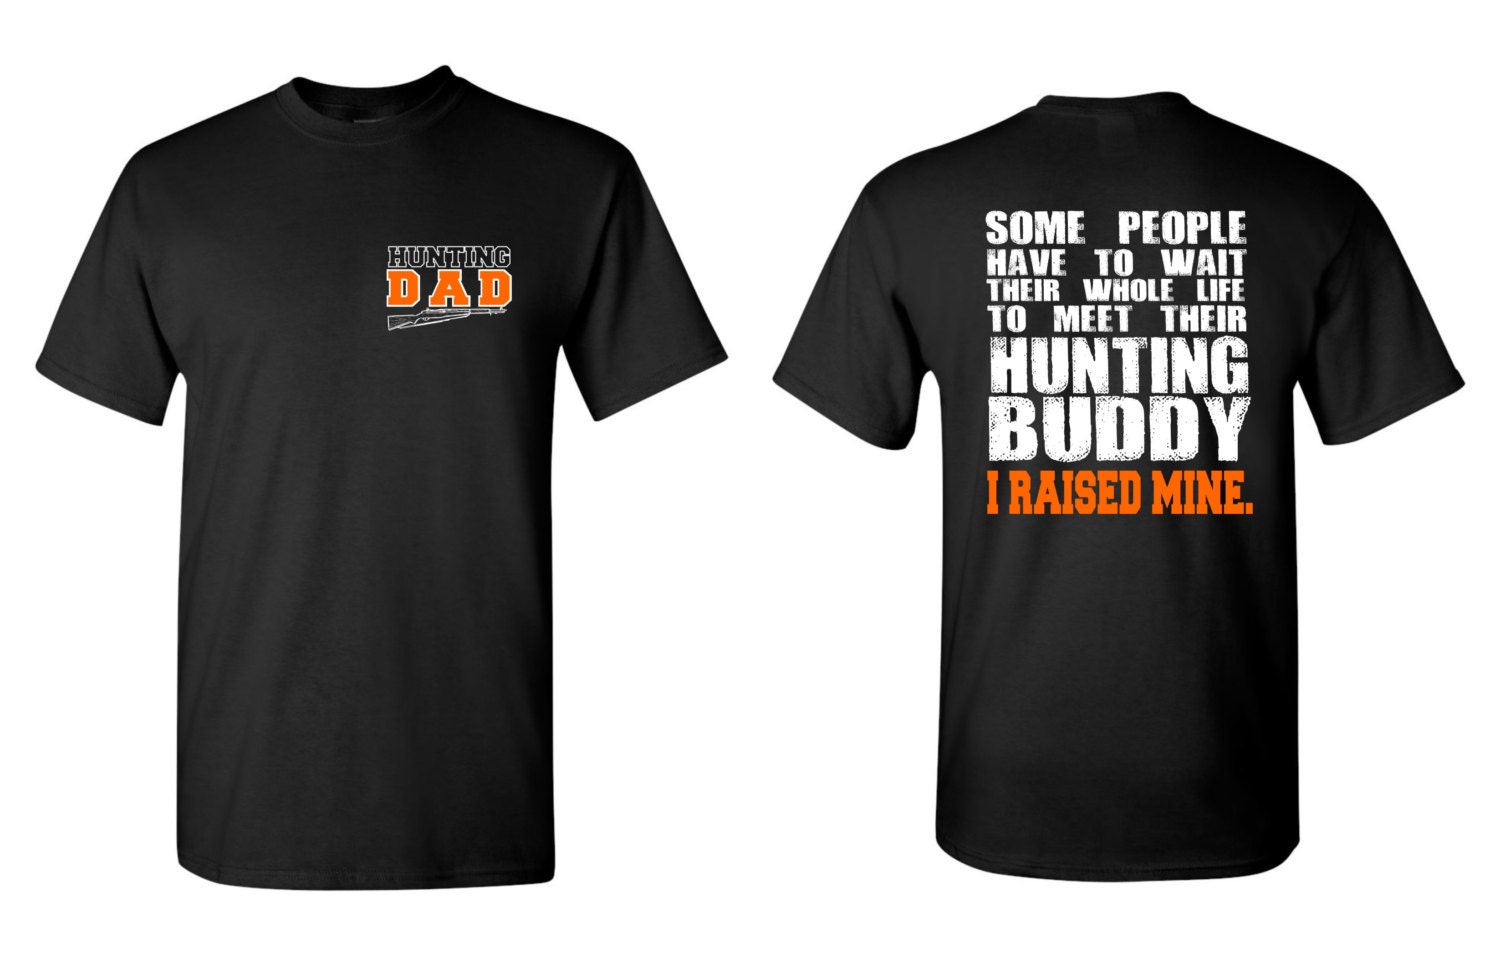 Download Hunting Dad T Shirt Some People Have to Wait Their Whole Life